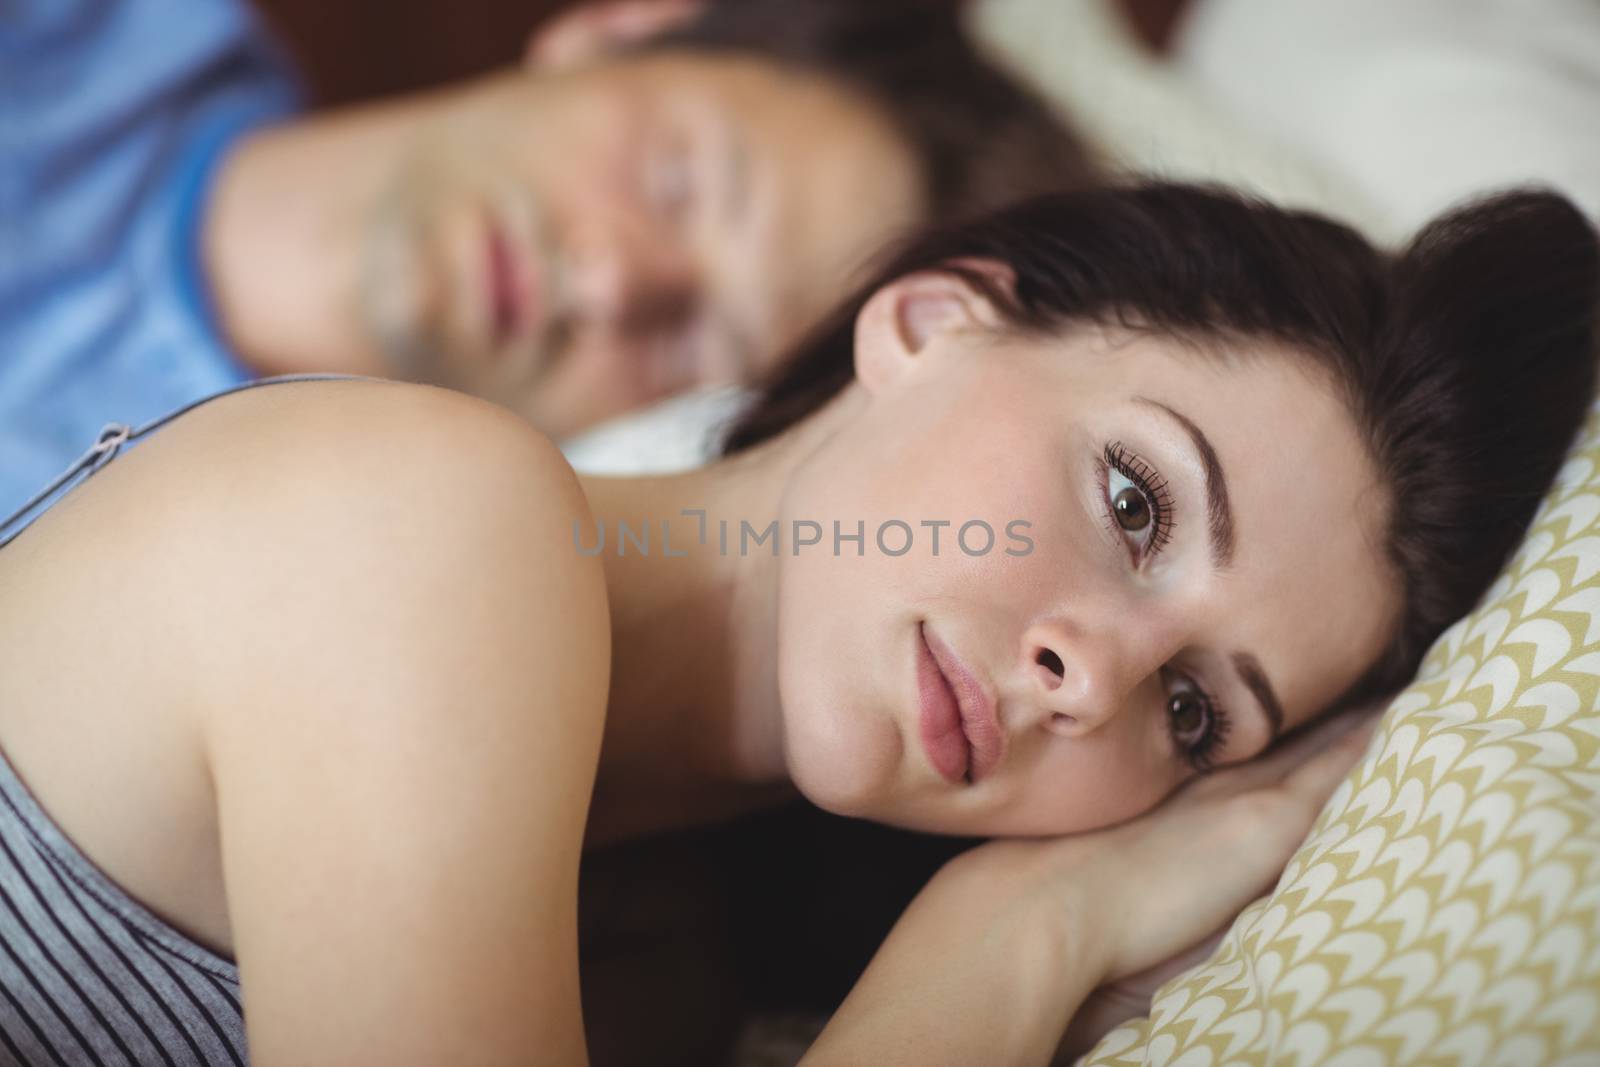 Romantic couple relaxing on bed by Wavebreakmedia